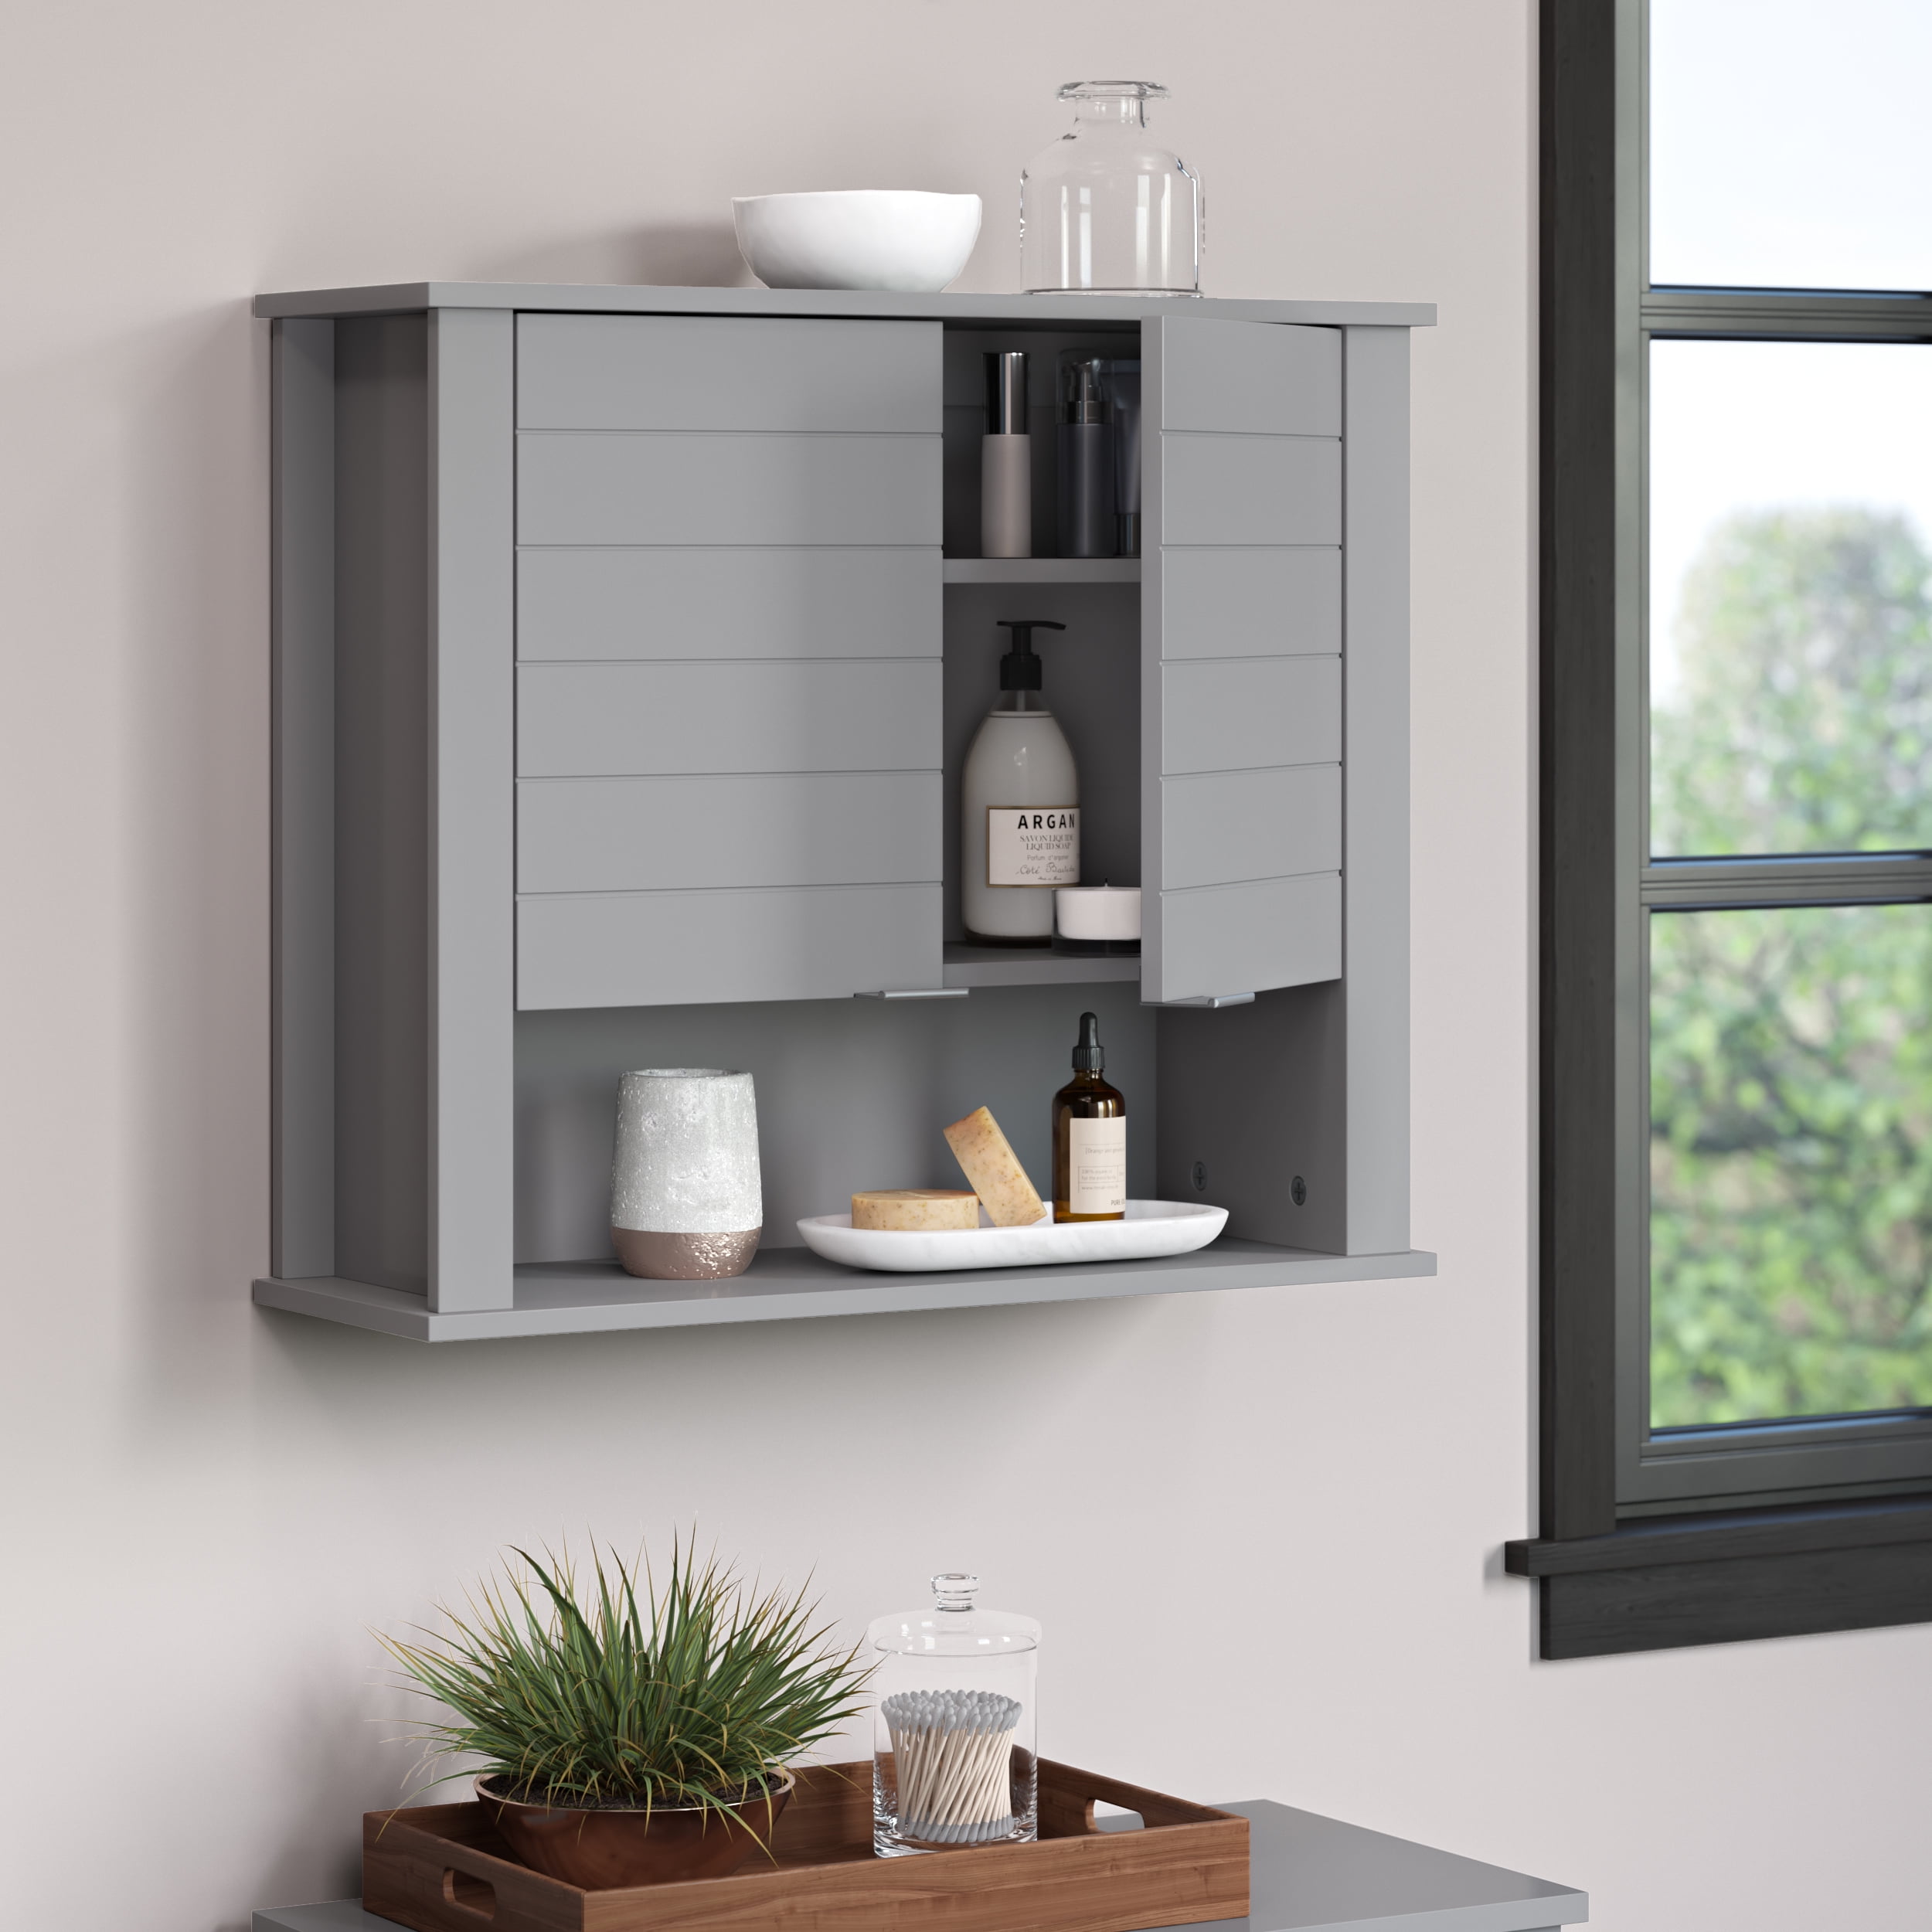 Details about   RiverRidge Home Madison Two-Door Wall Cabinet Gray 